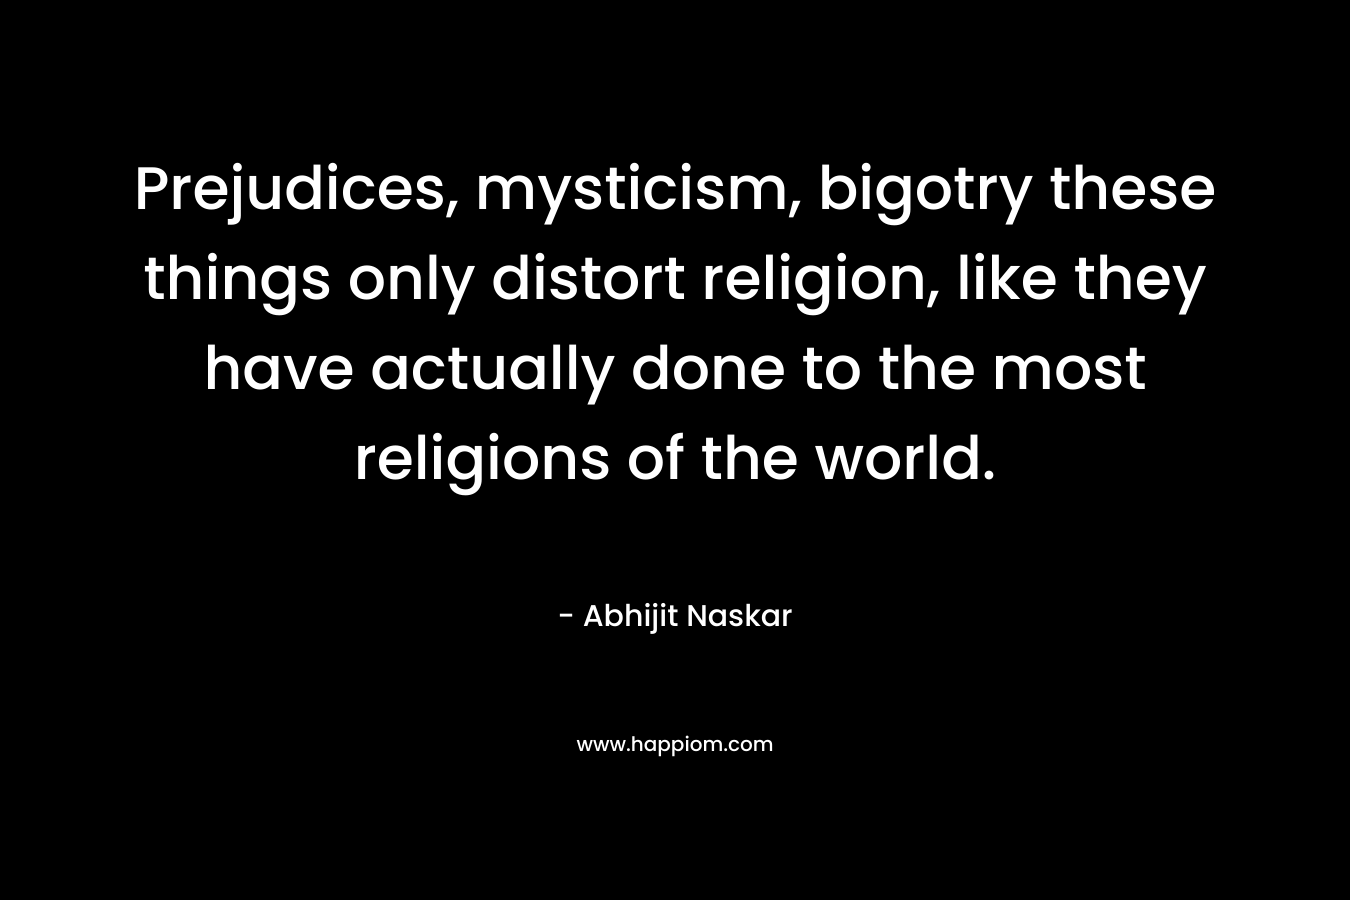 Prejudices, mysticism, bigotry these things only distort religion, like they have actually done to the most religions of the world.